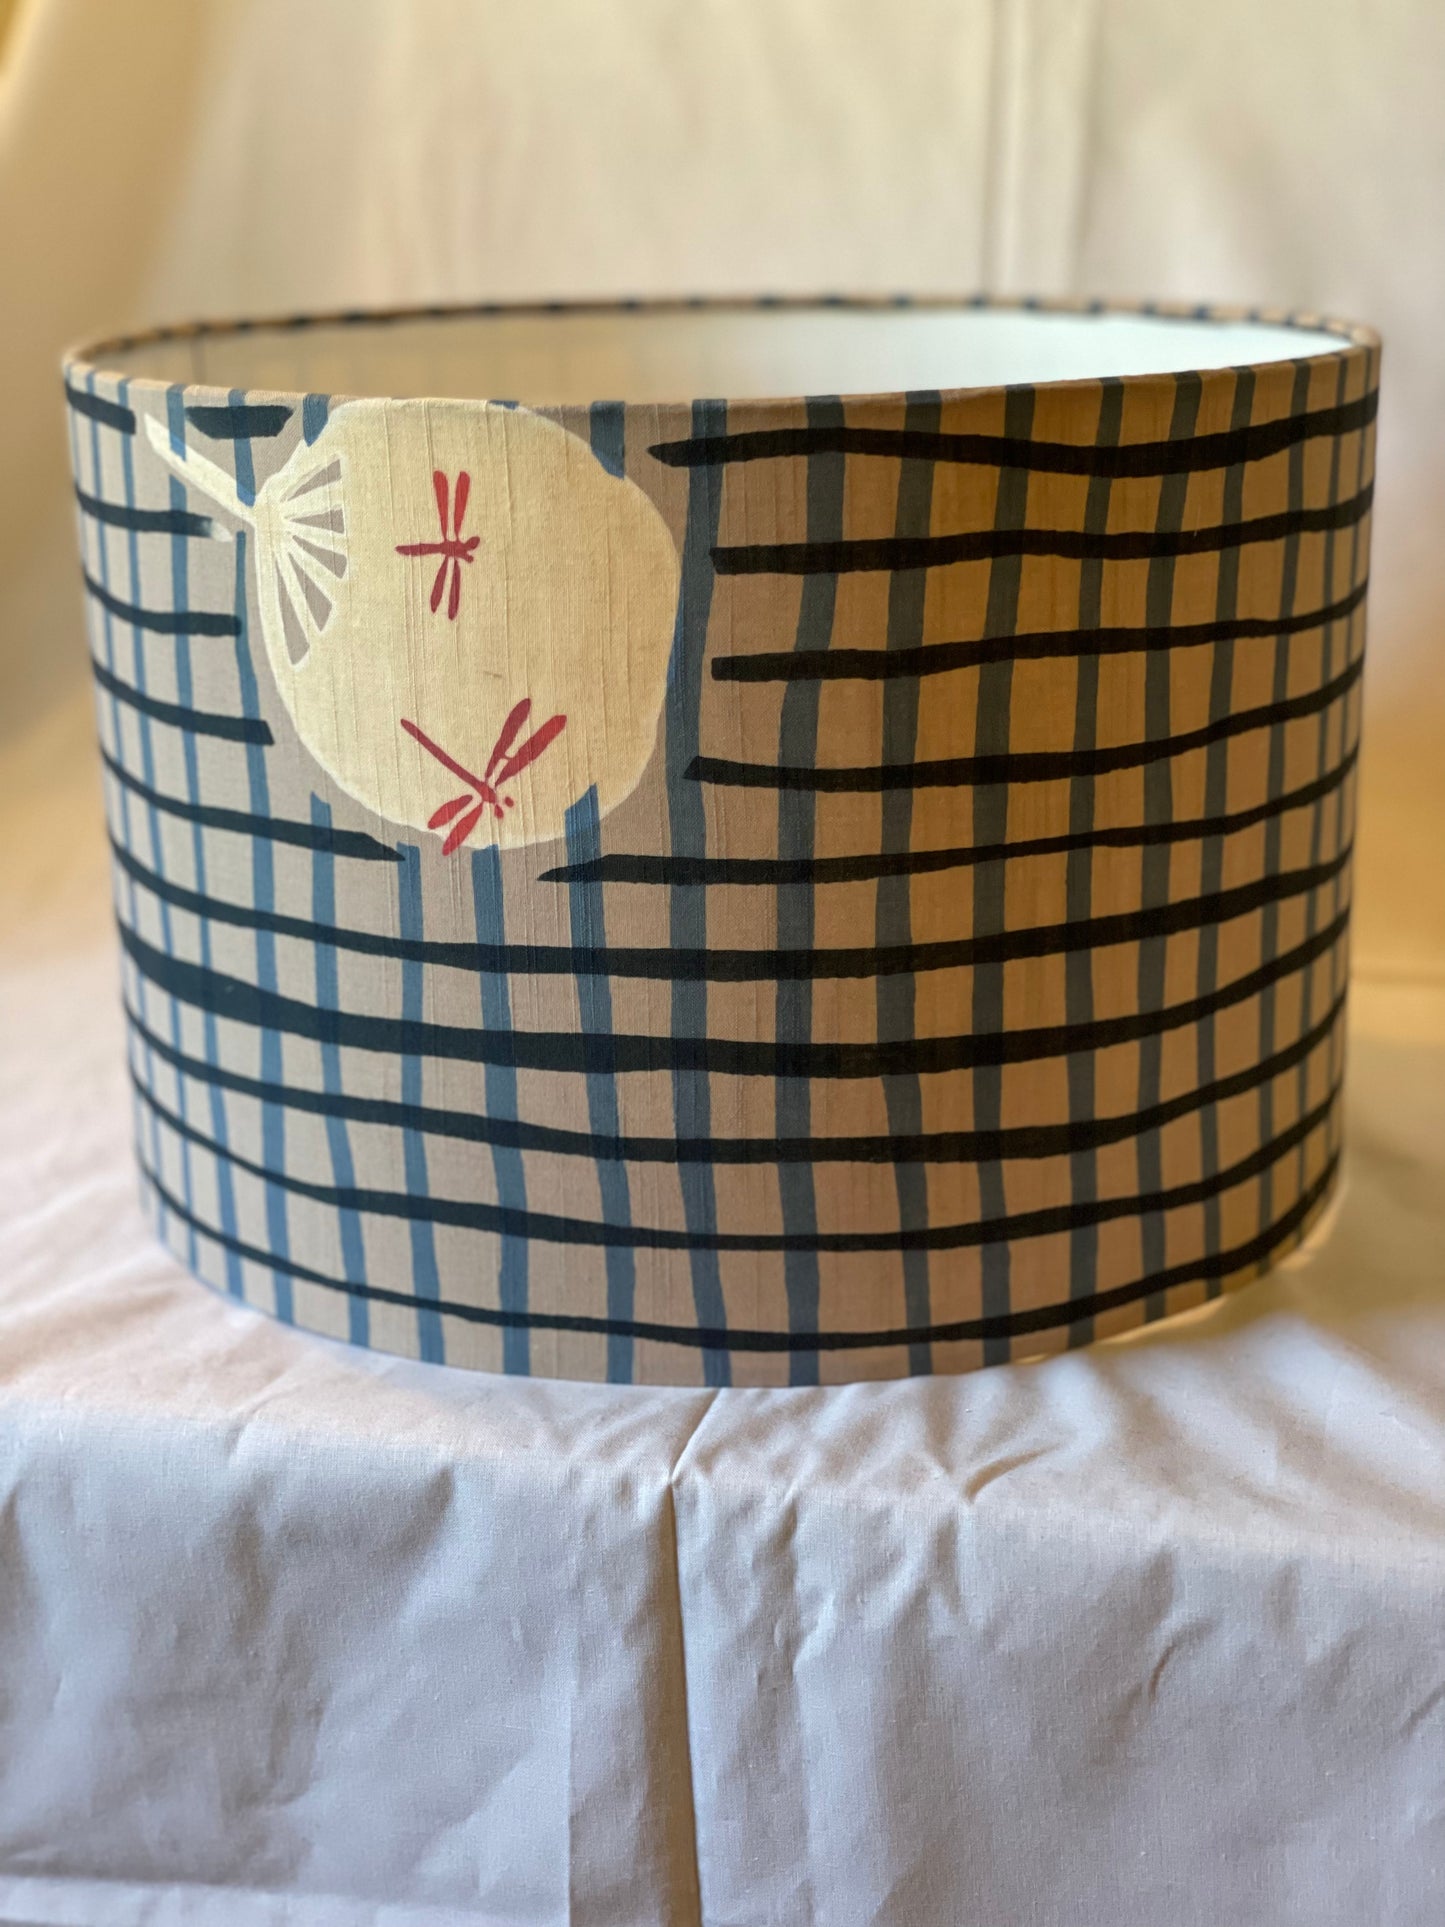 12 Inch Drum Shade. Vintage Summer Kimono Fabric. Light Raw Umber with Licorice and Cadet Grey Hashing. Pink and Light Khaki detail.